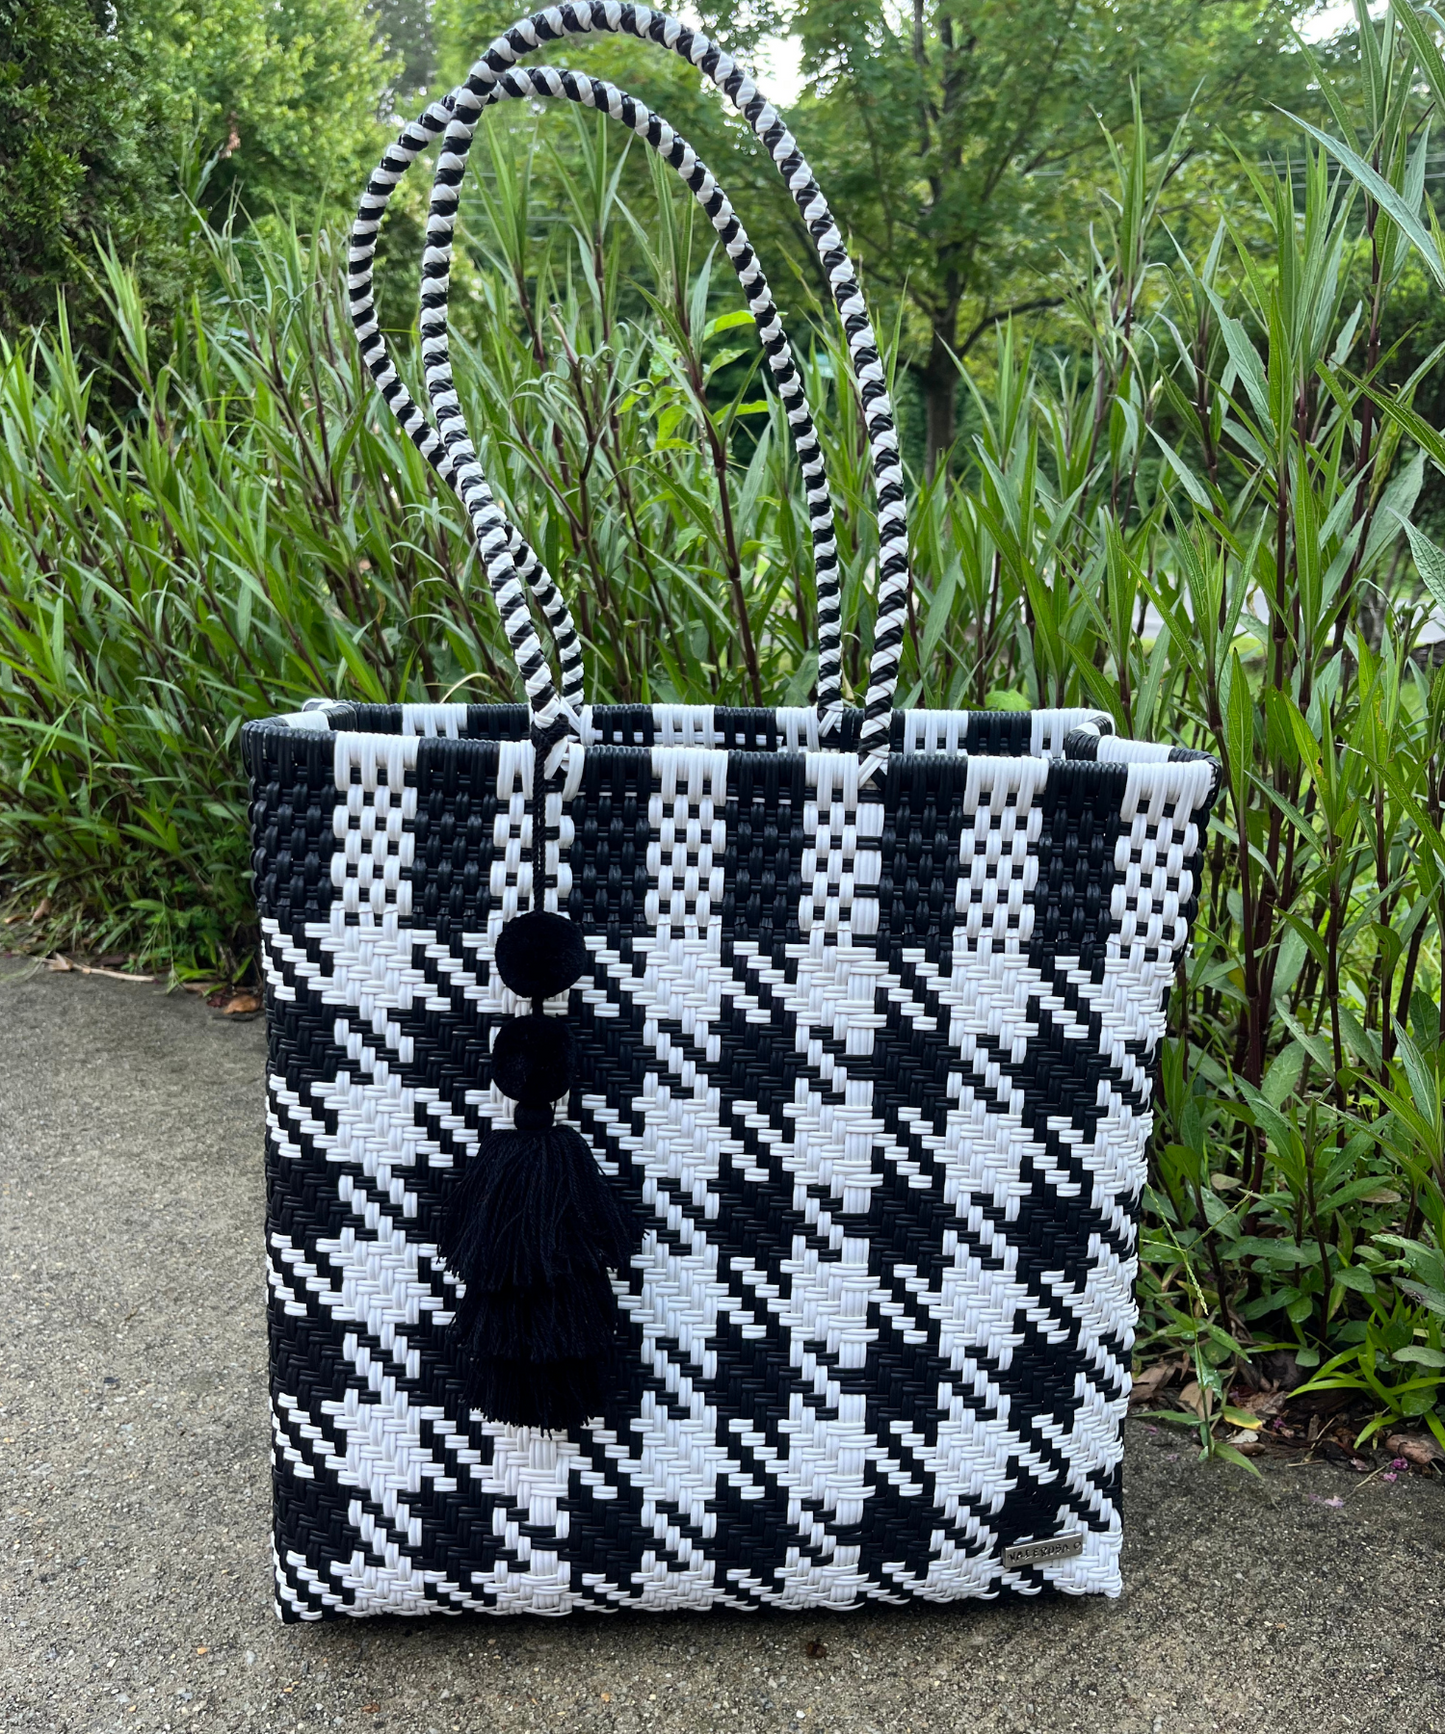 Black and White Houndstooth Playera Tote